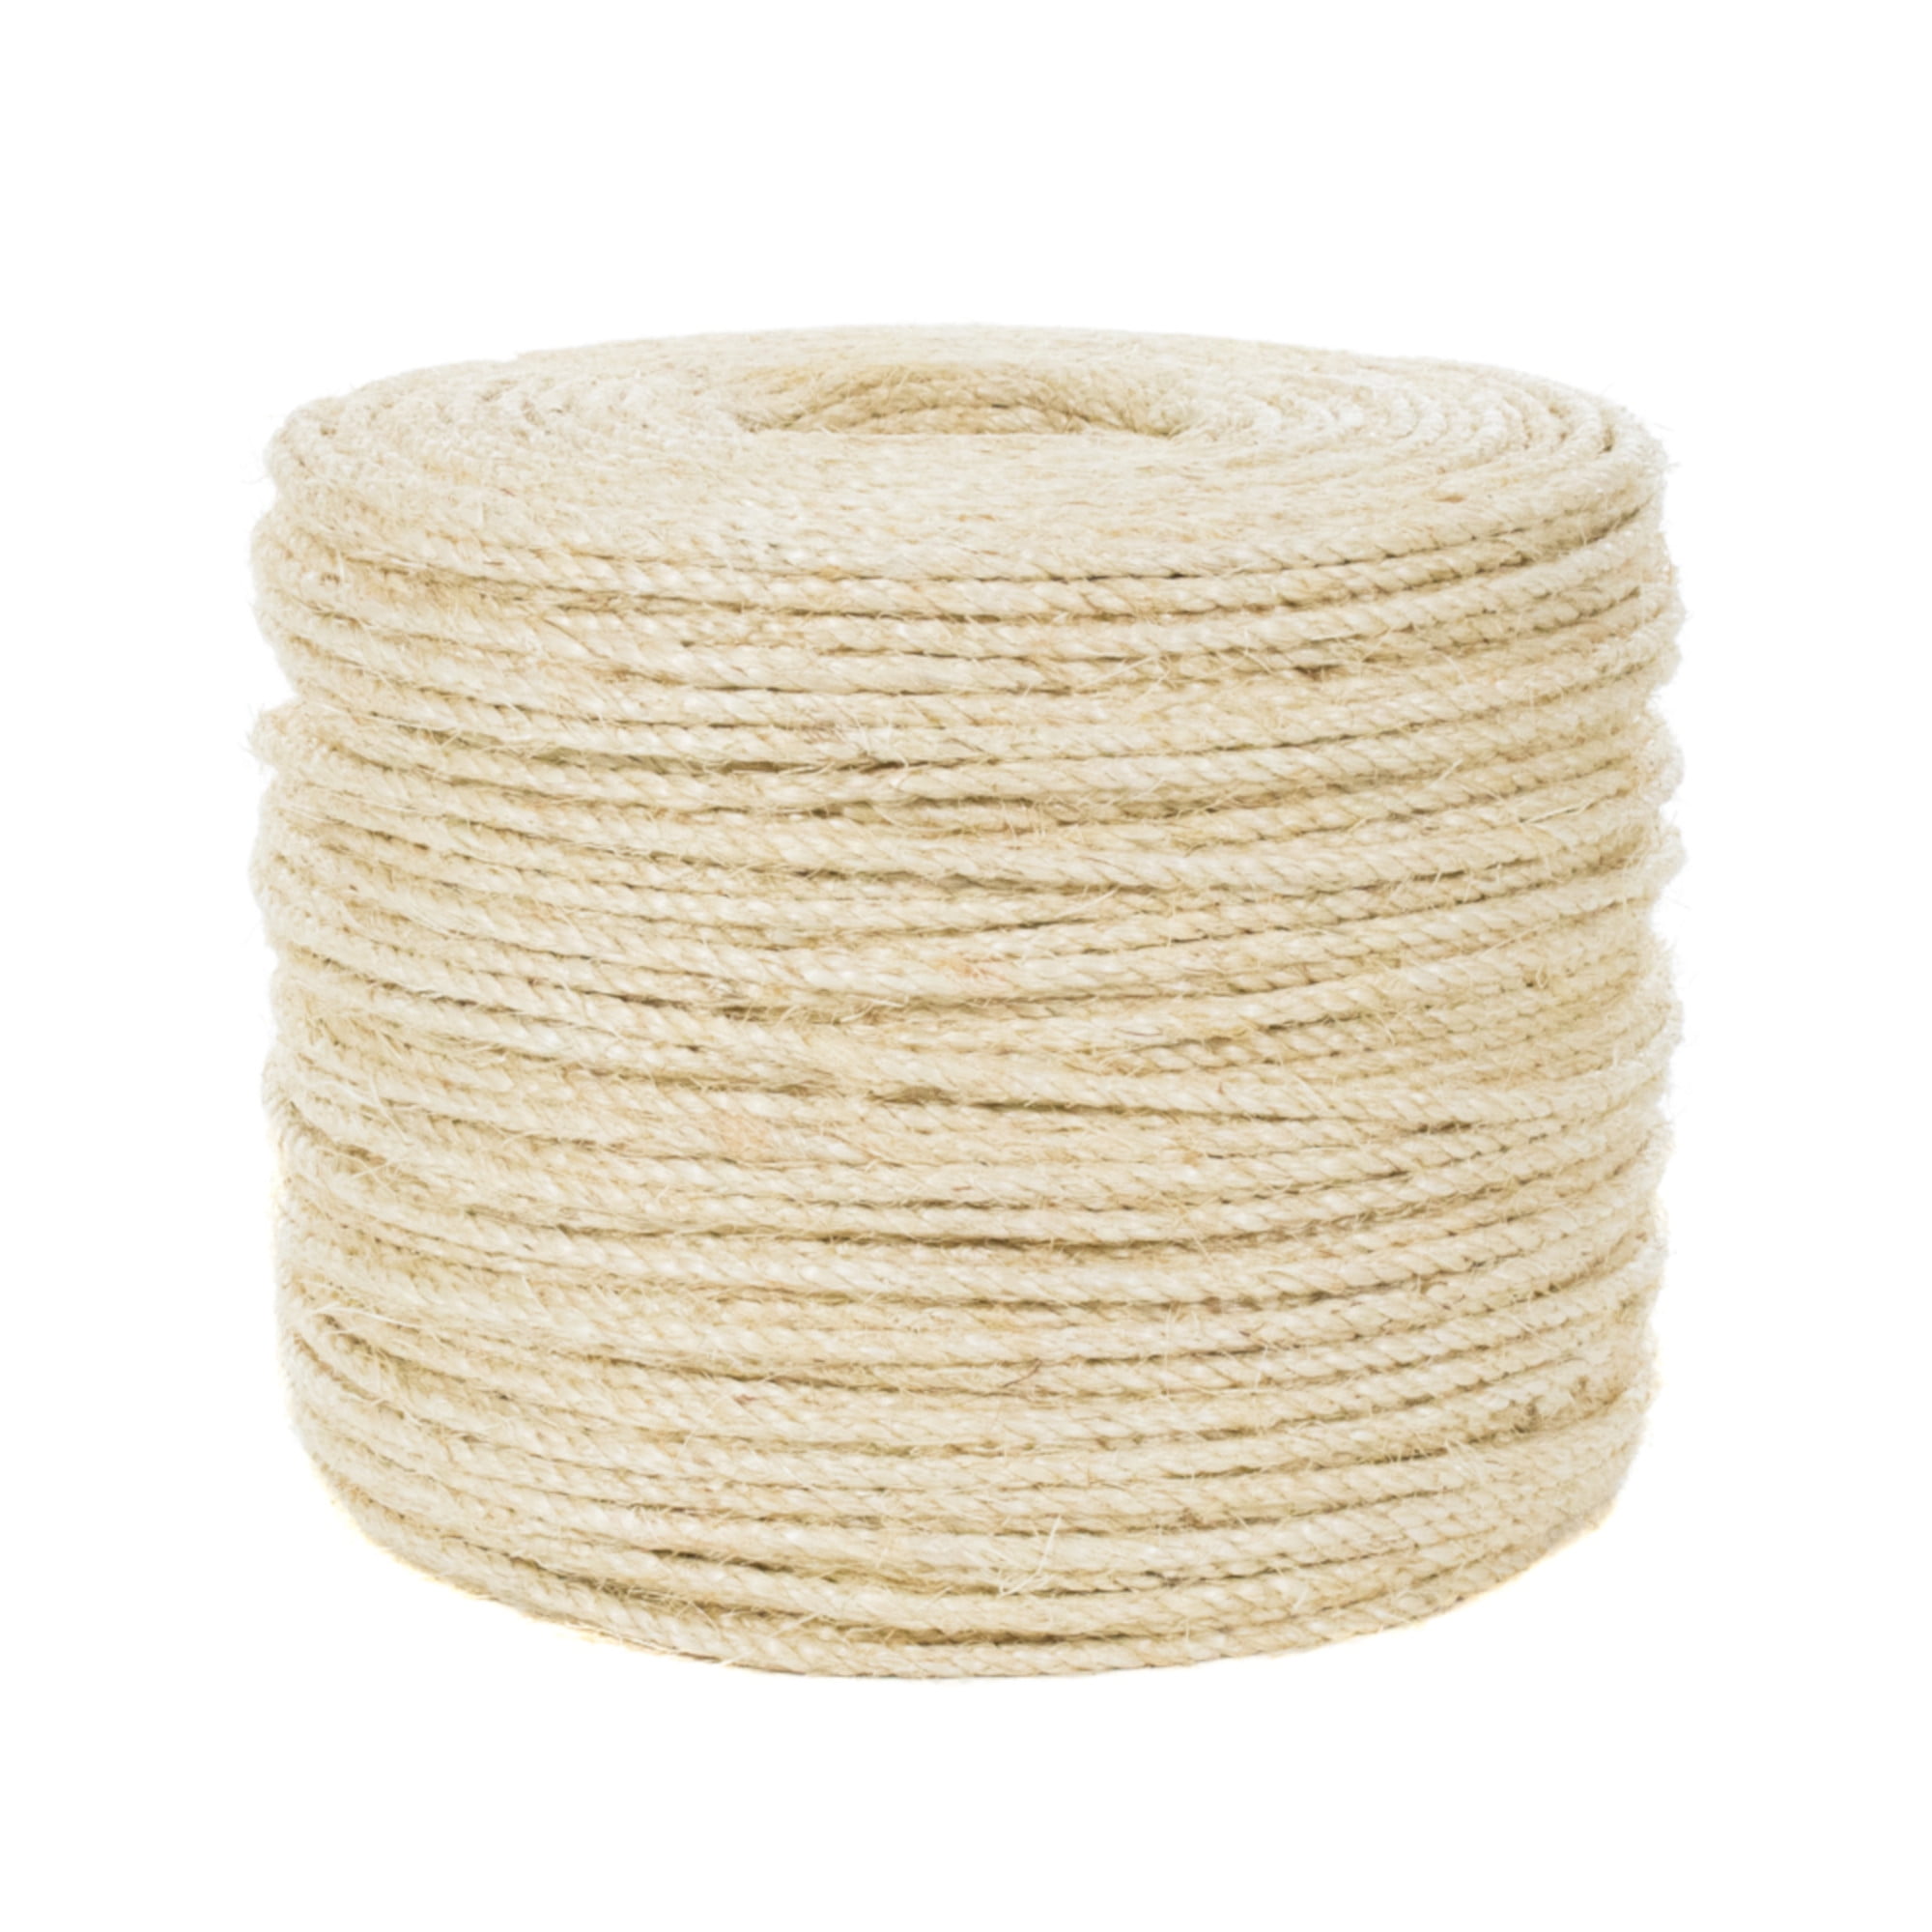 5/8" 3/4" in White 3/8" 5/16" GOLBERG Twisted Polypropylene Rope 1/4" 1/2"